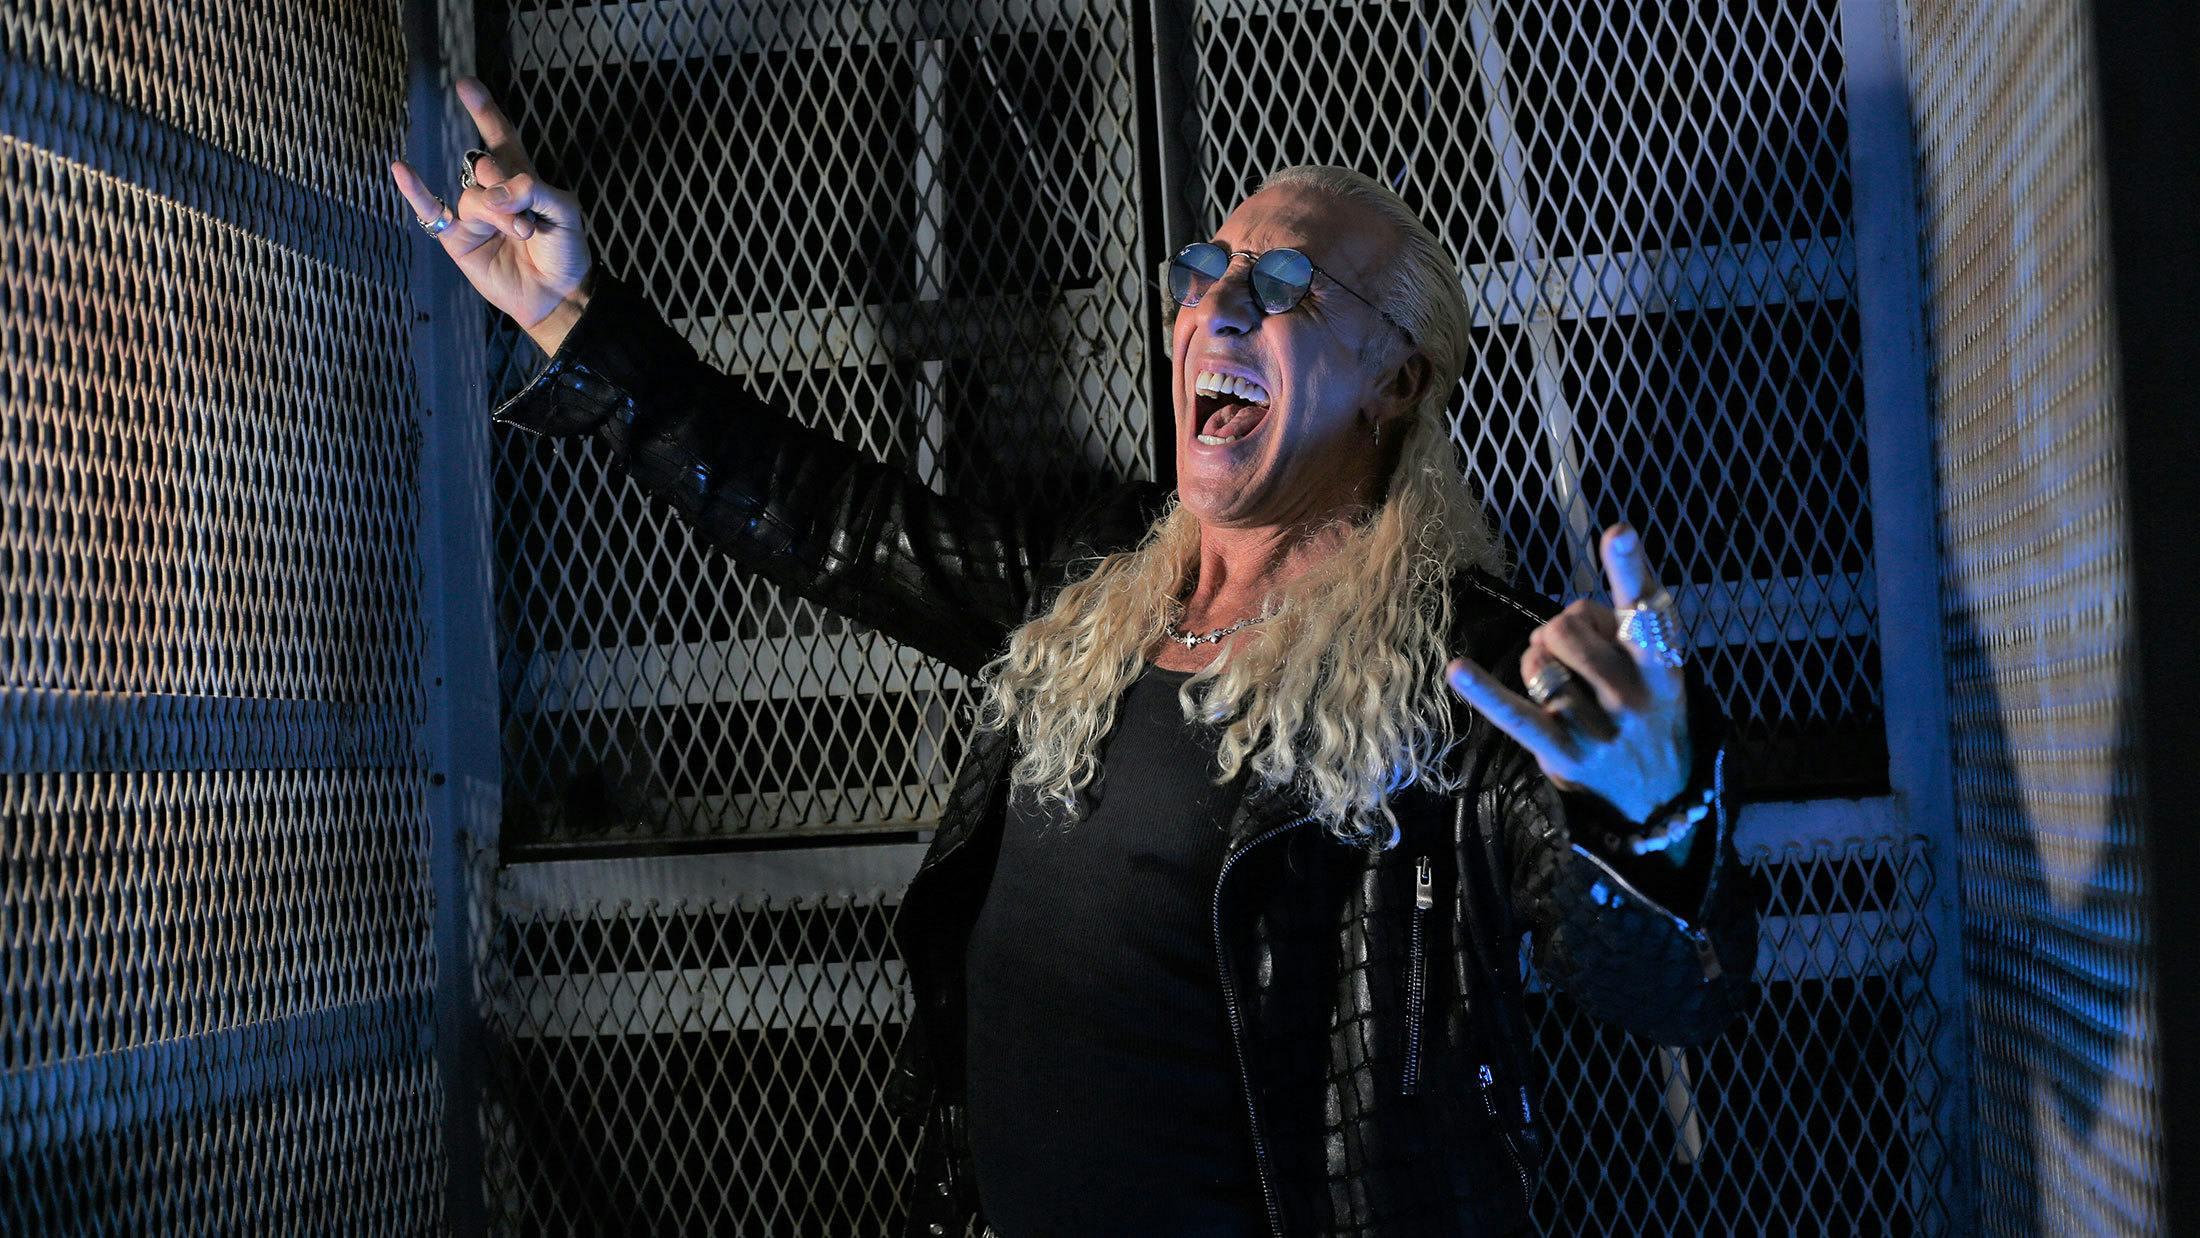 Dee Snider: "We used to wear women's clothing, until the night my wife showed up and I was wearing the same top she was"